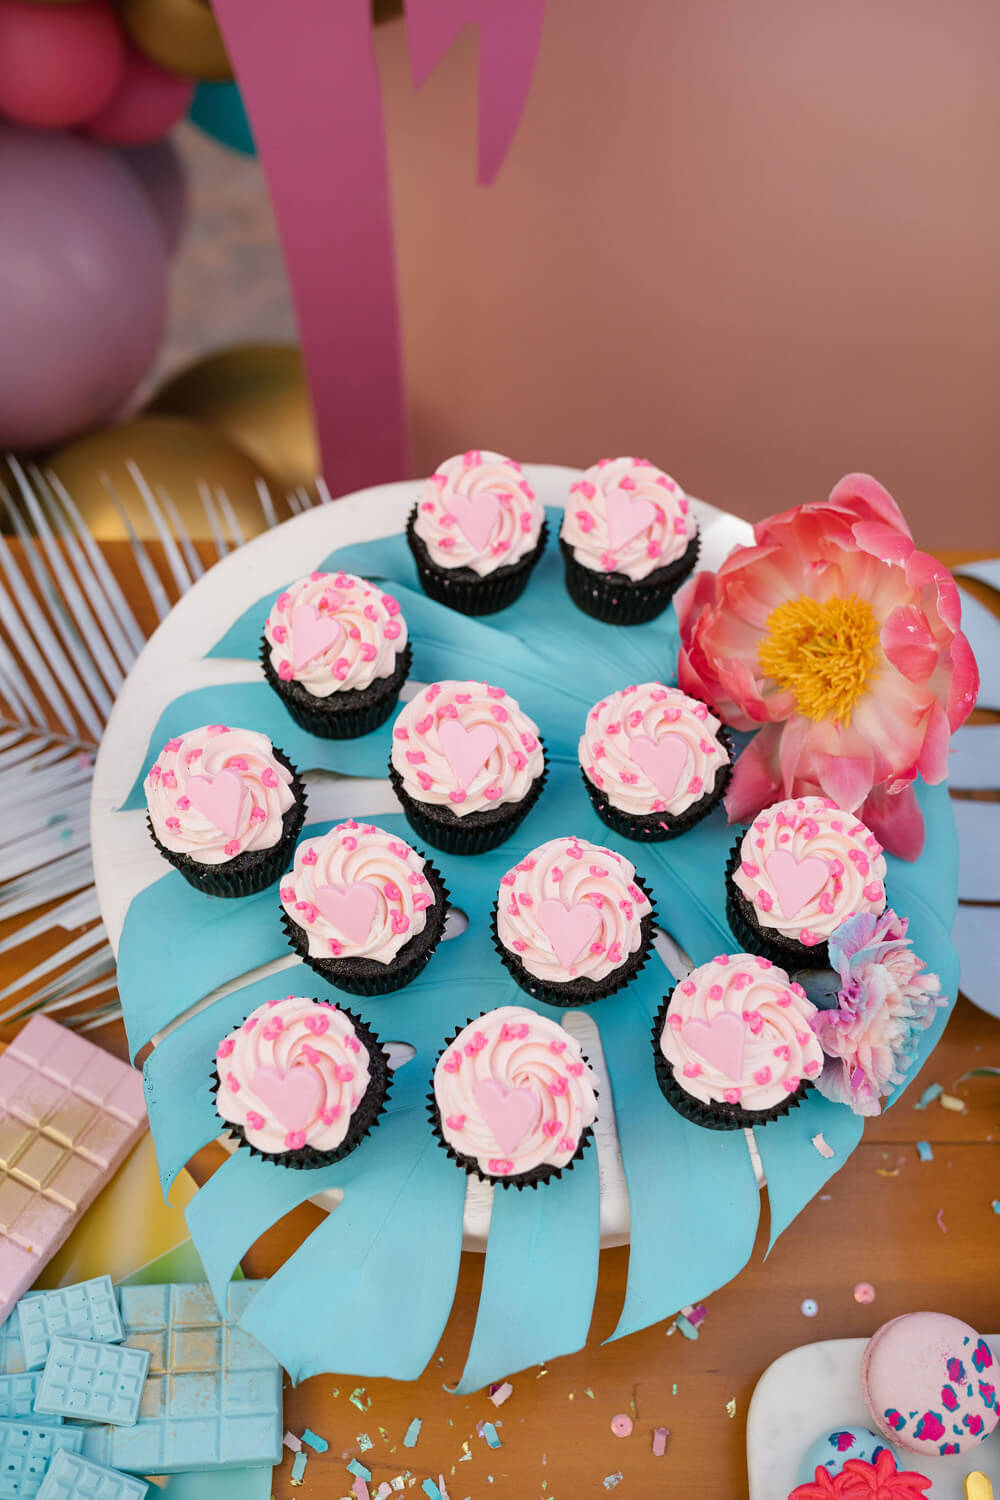 Barbie cupcakes for 8th birthday party